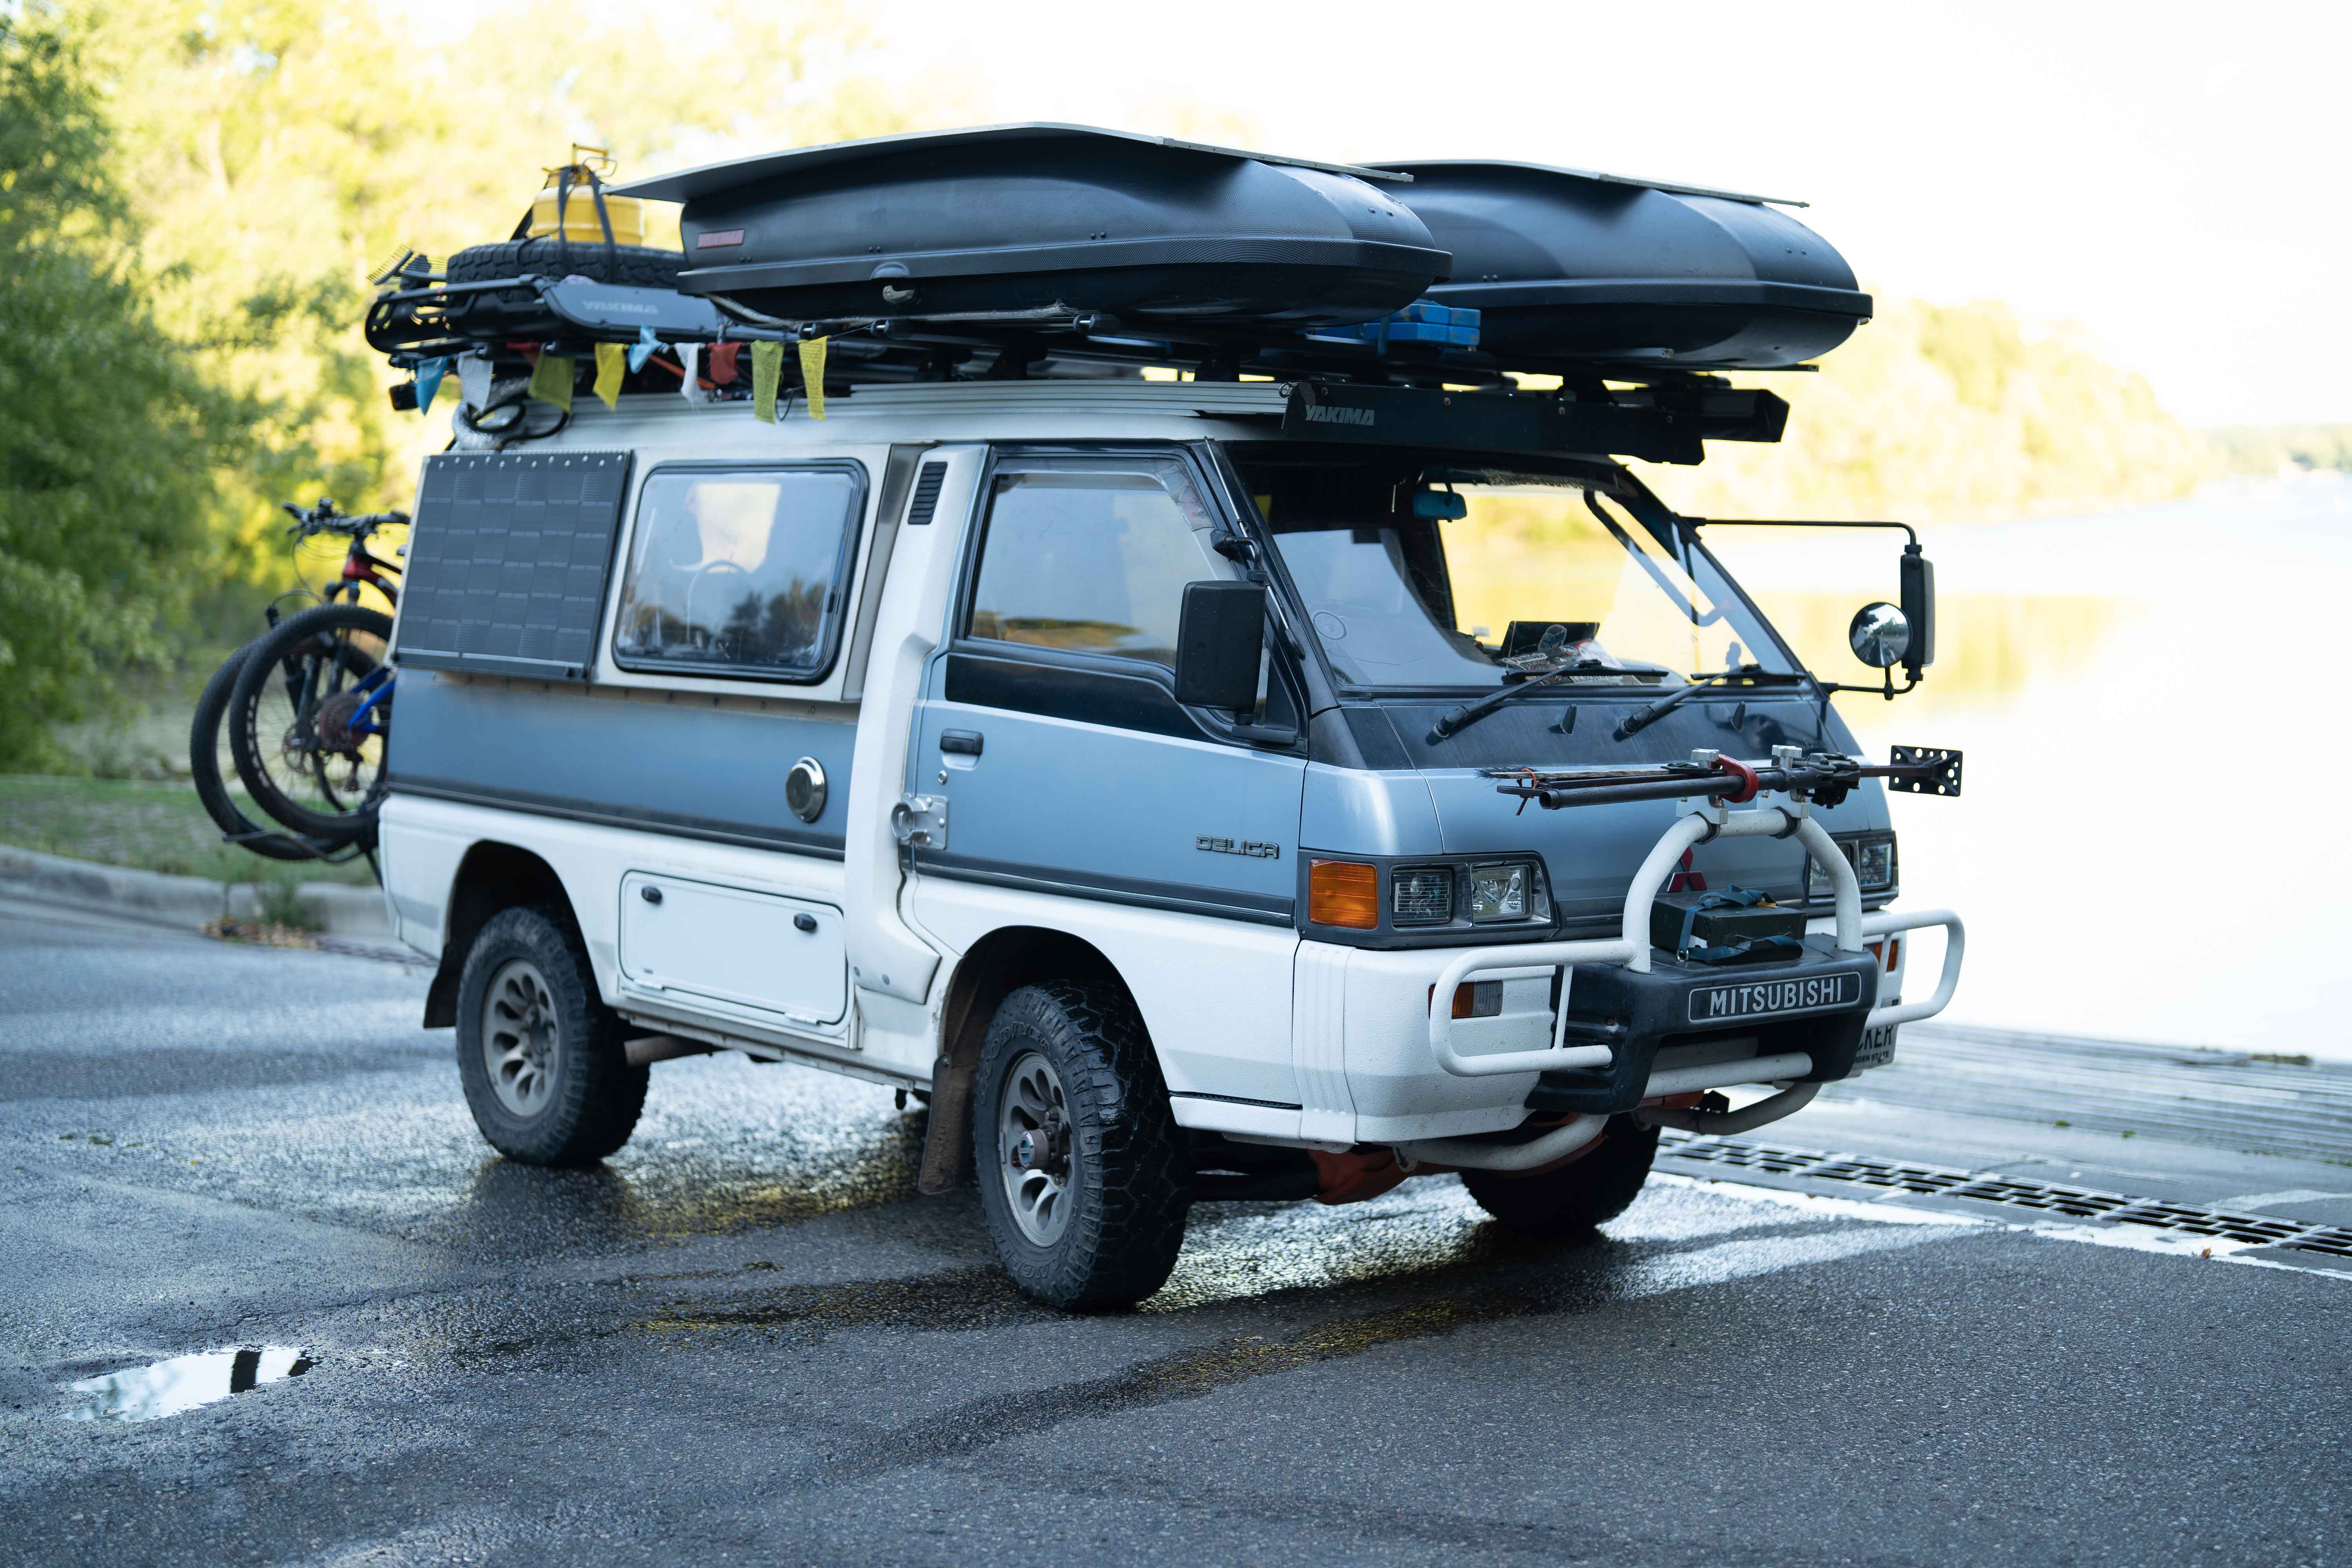 Delica Like No Other: This 1988 Mitsubishi Might Be the Most Impressive Van Life Build Ever